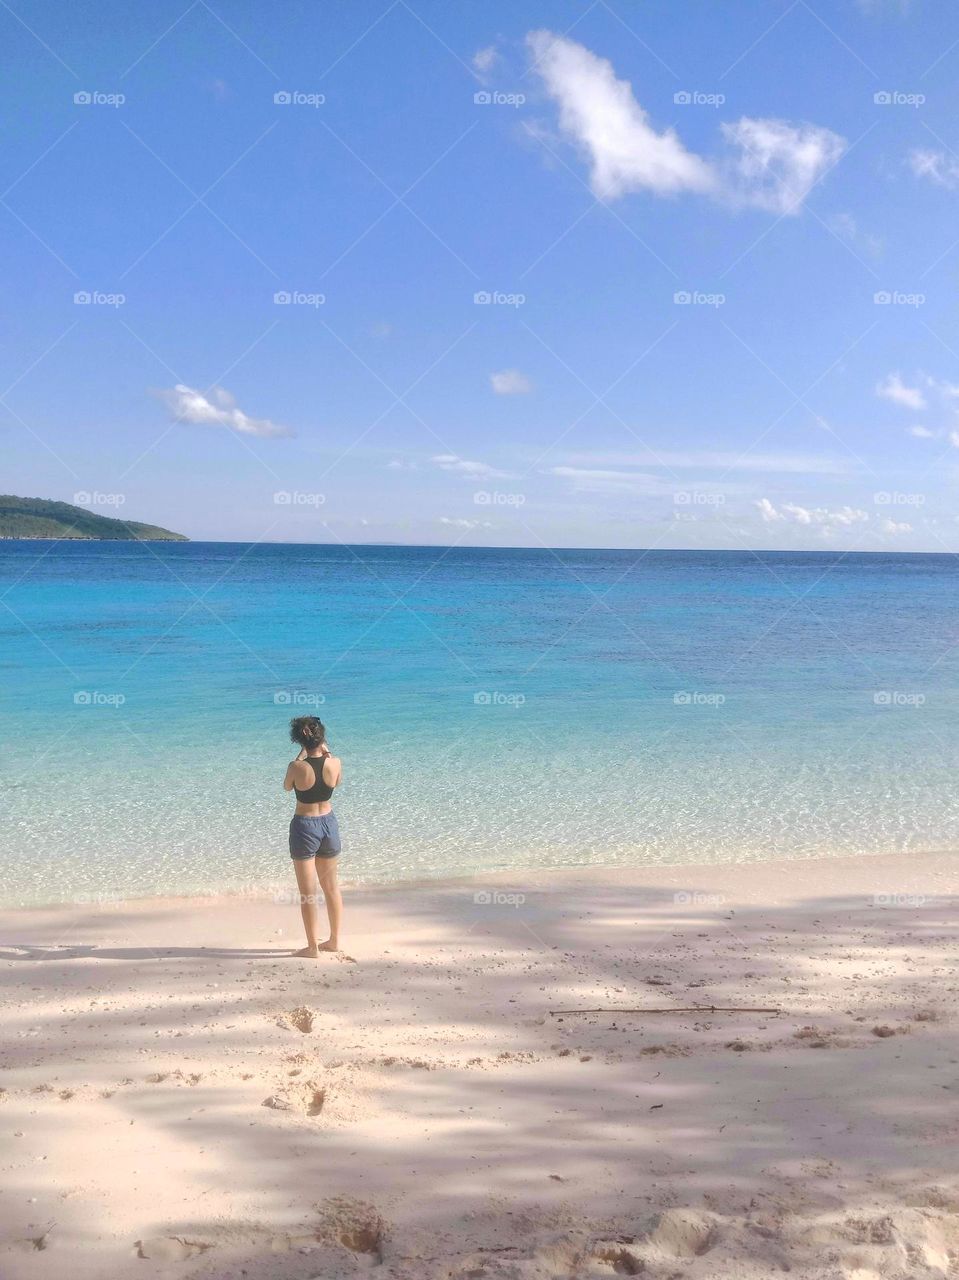 A girl enjoying the beauty of clear seawaters on a sunny day in a tropical island